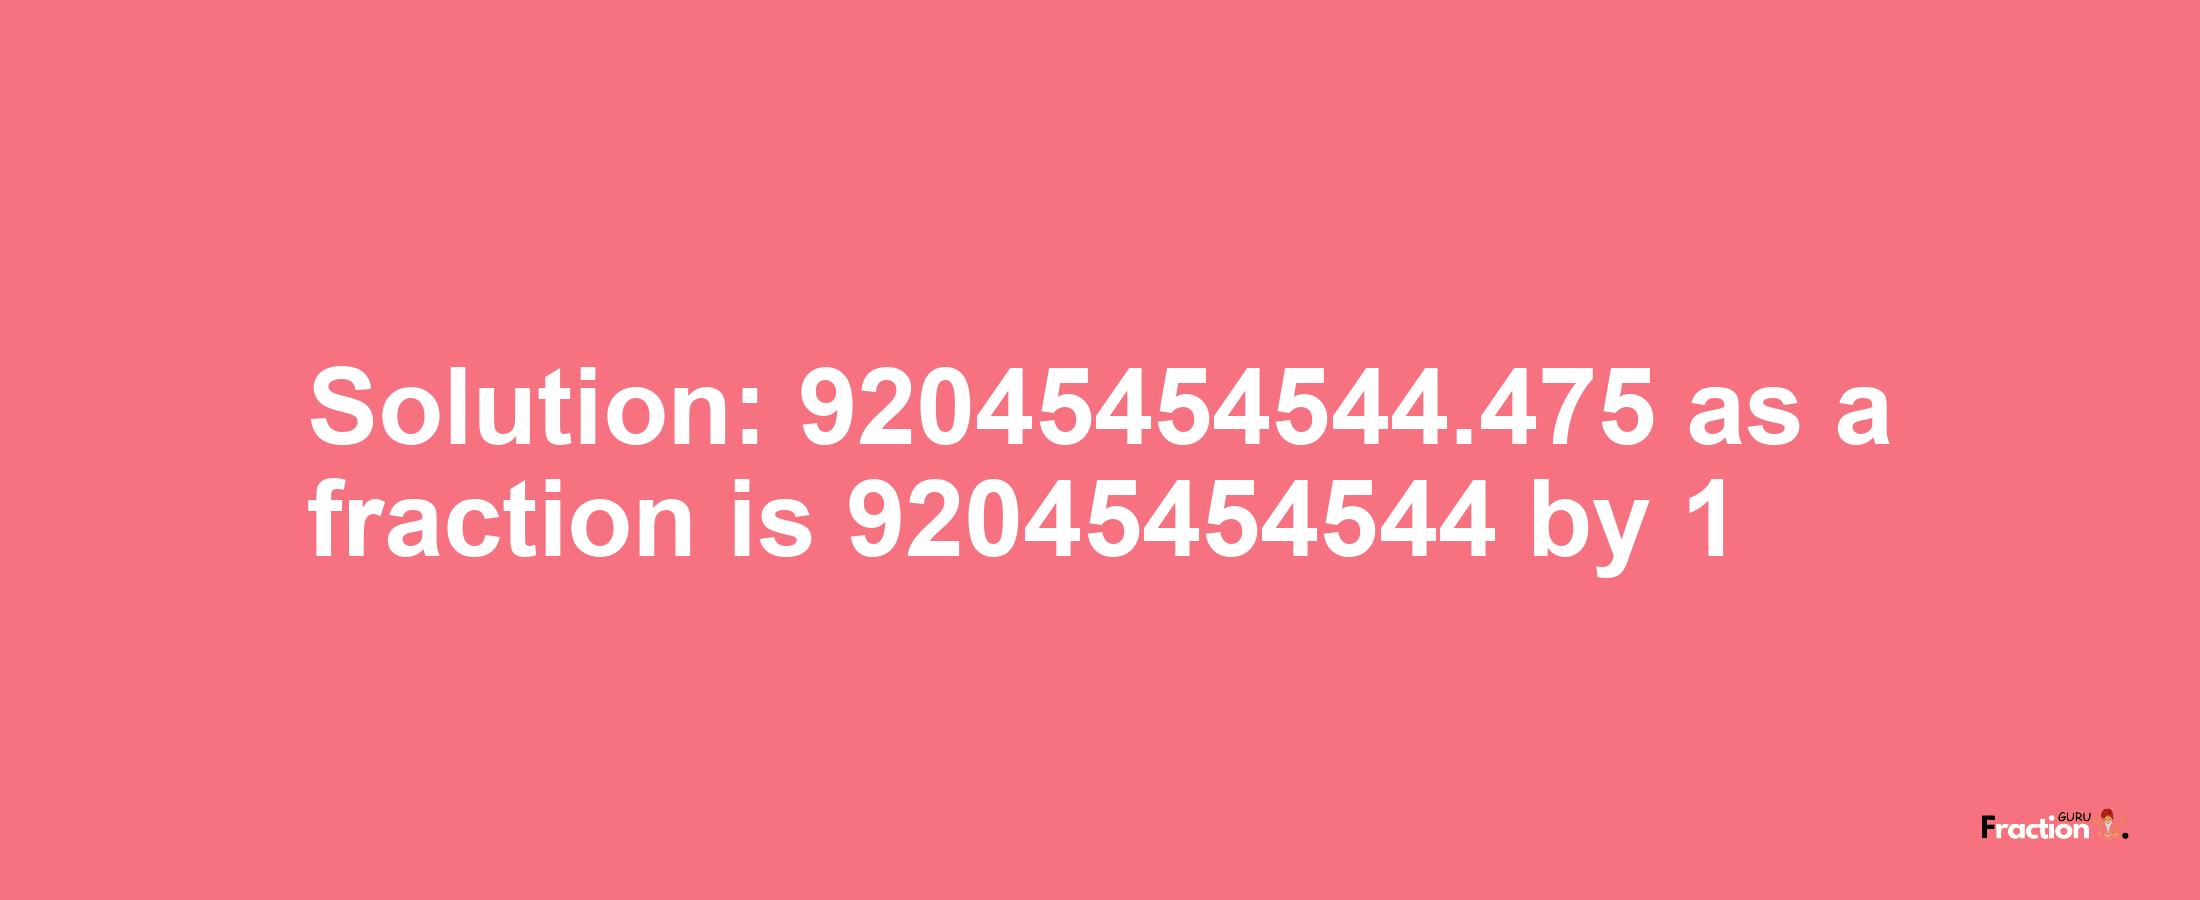 Solution:92045454544.475 as a fraction is 92045454544/1